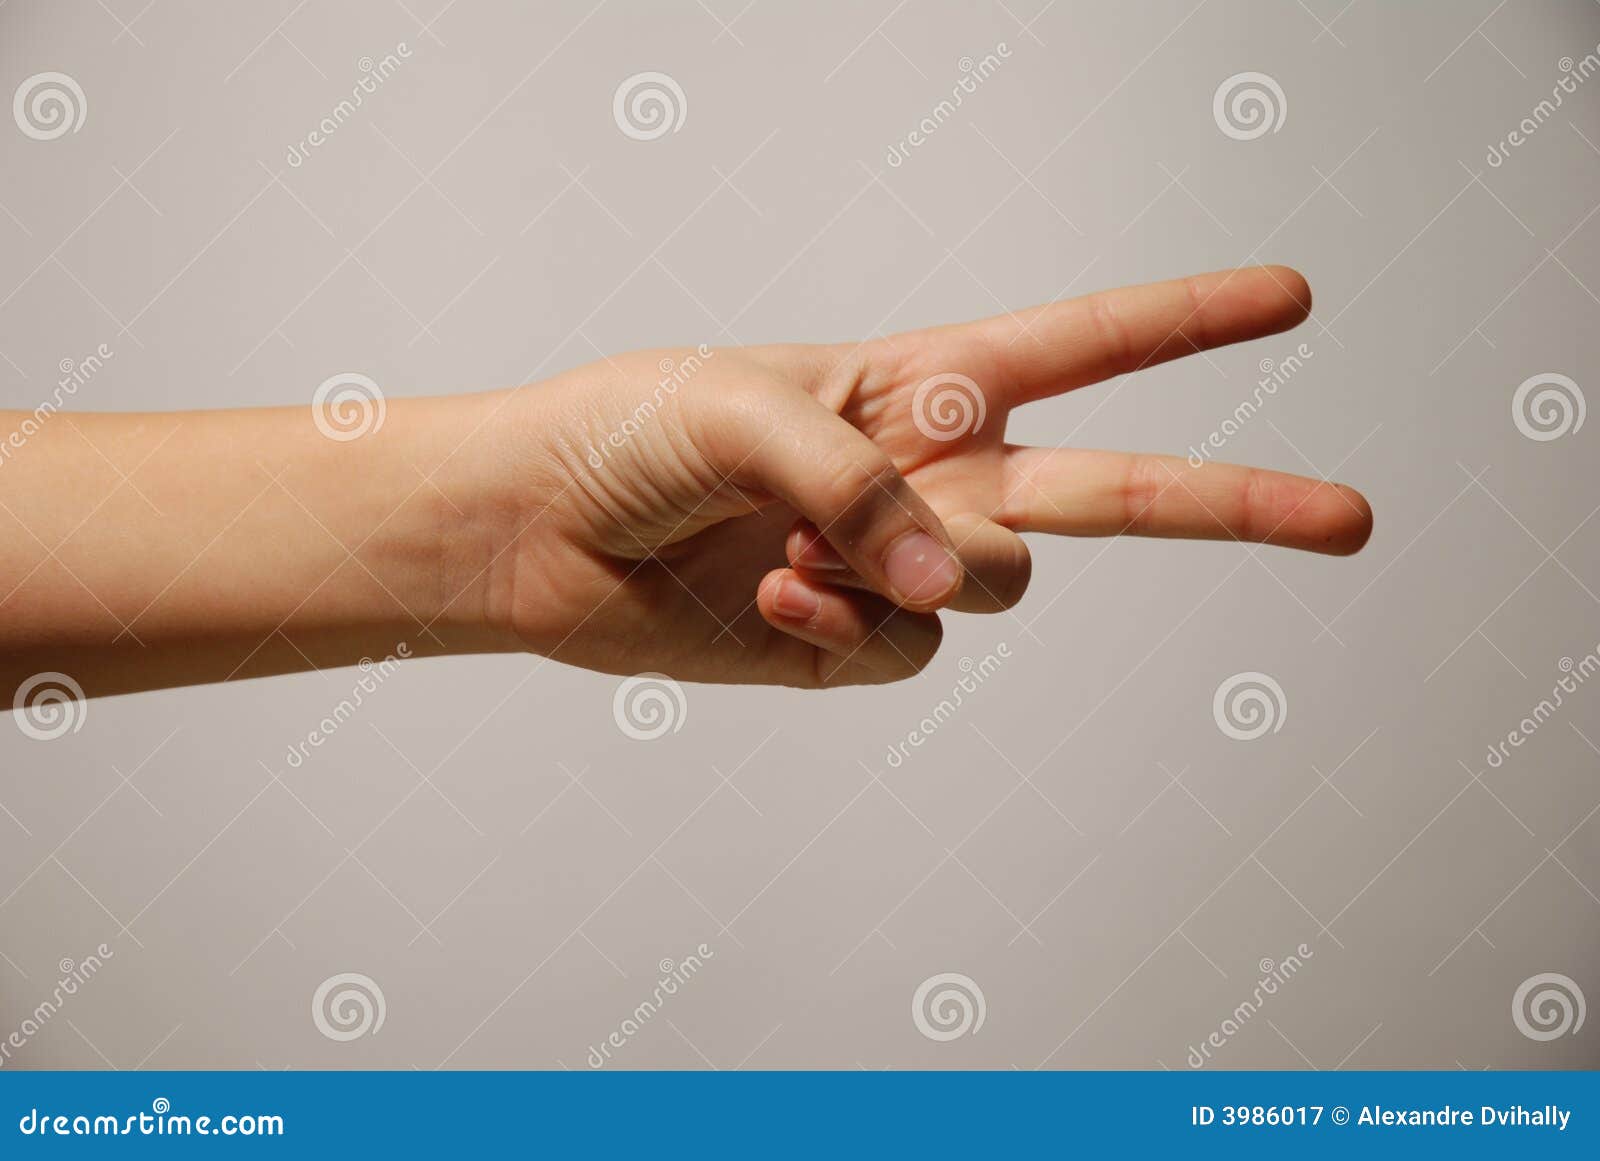 Hand With Two Fingers Extended Royalty Free Stock Photography - Image